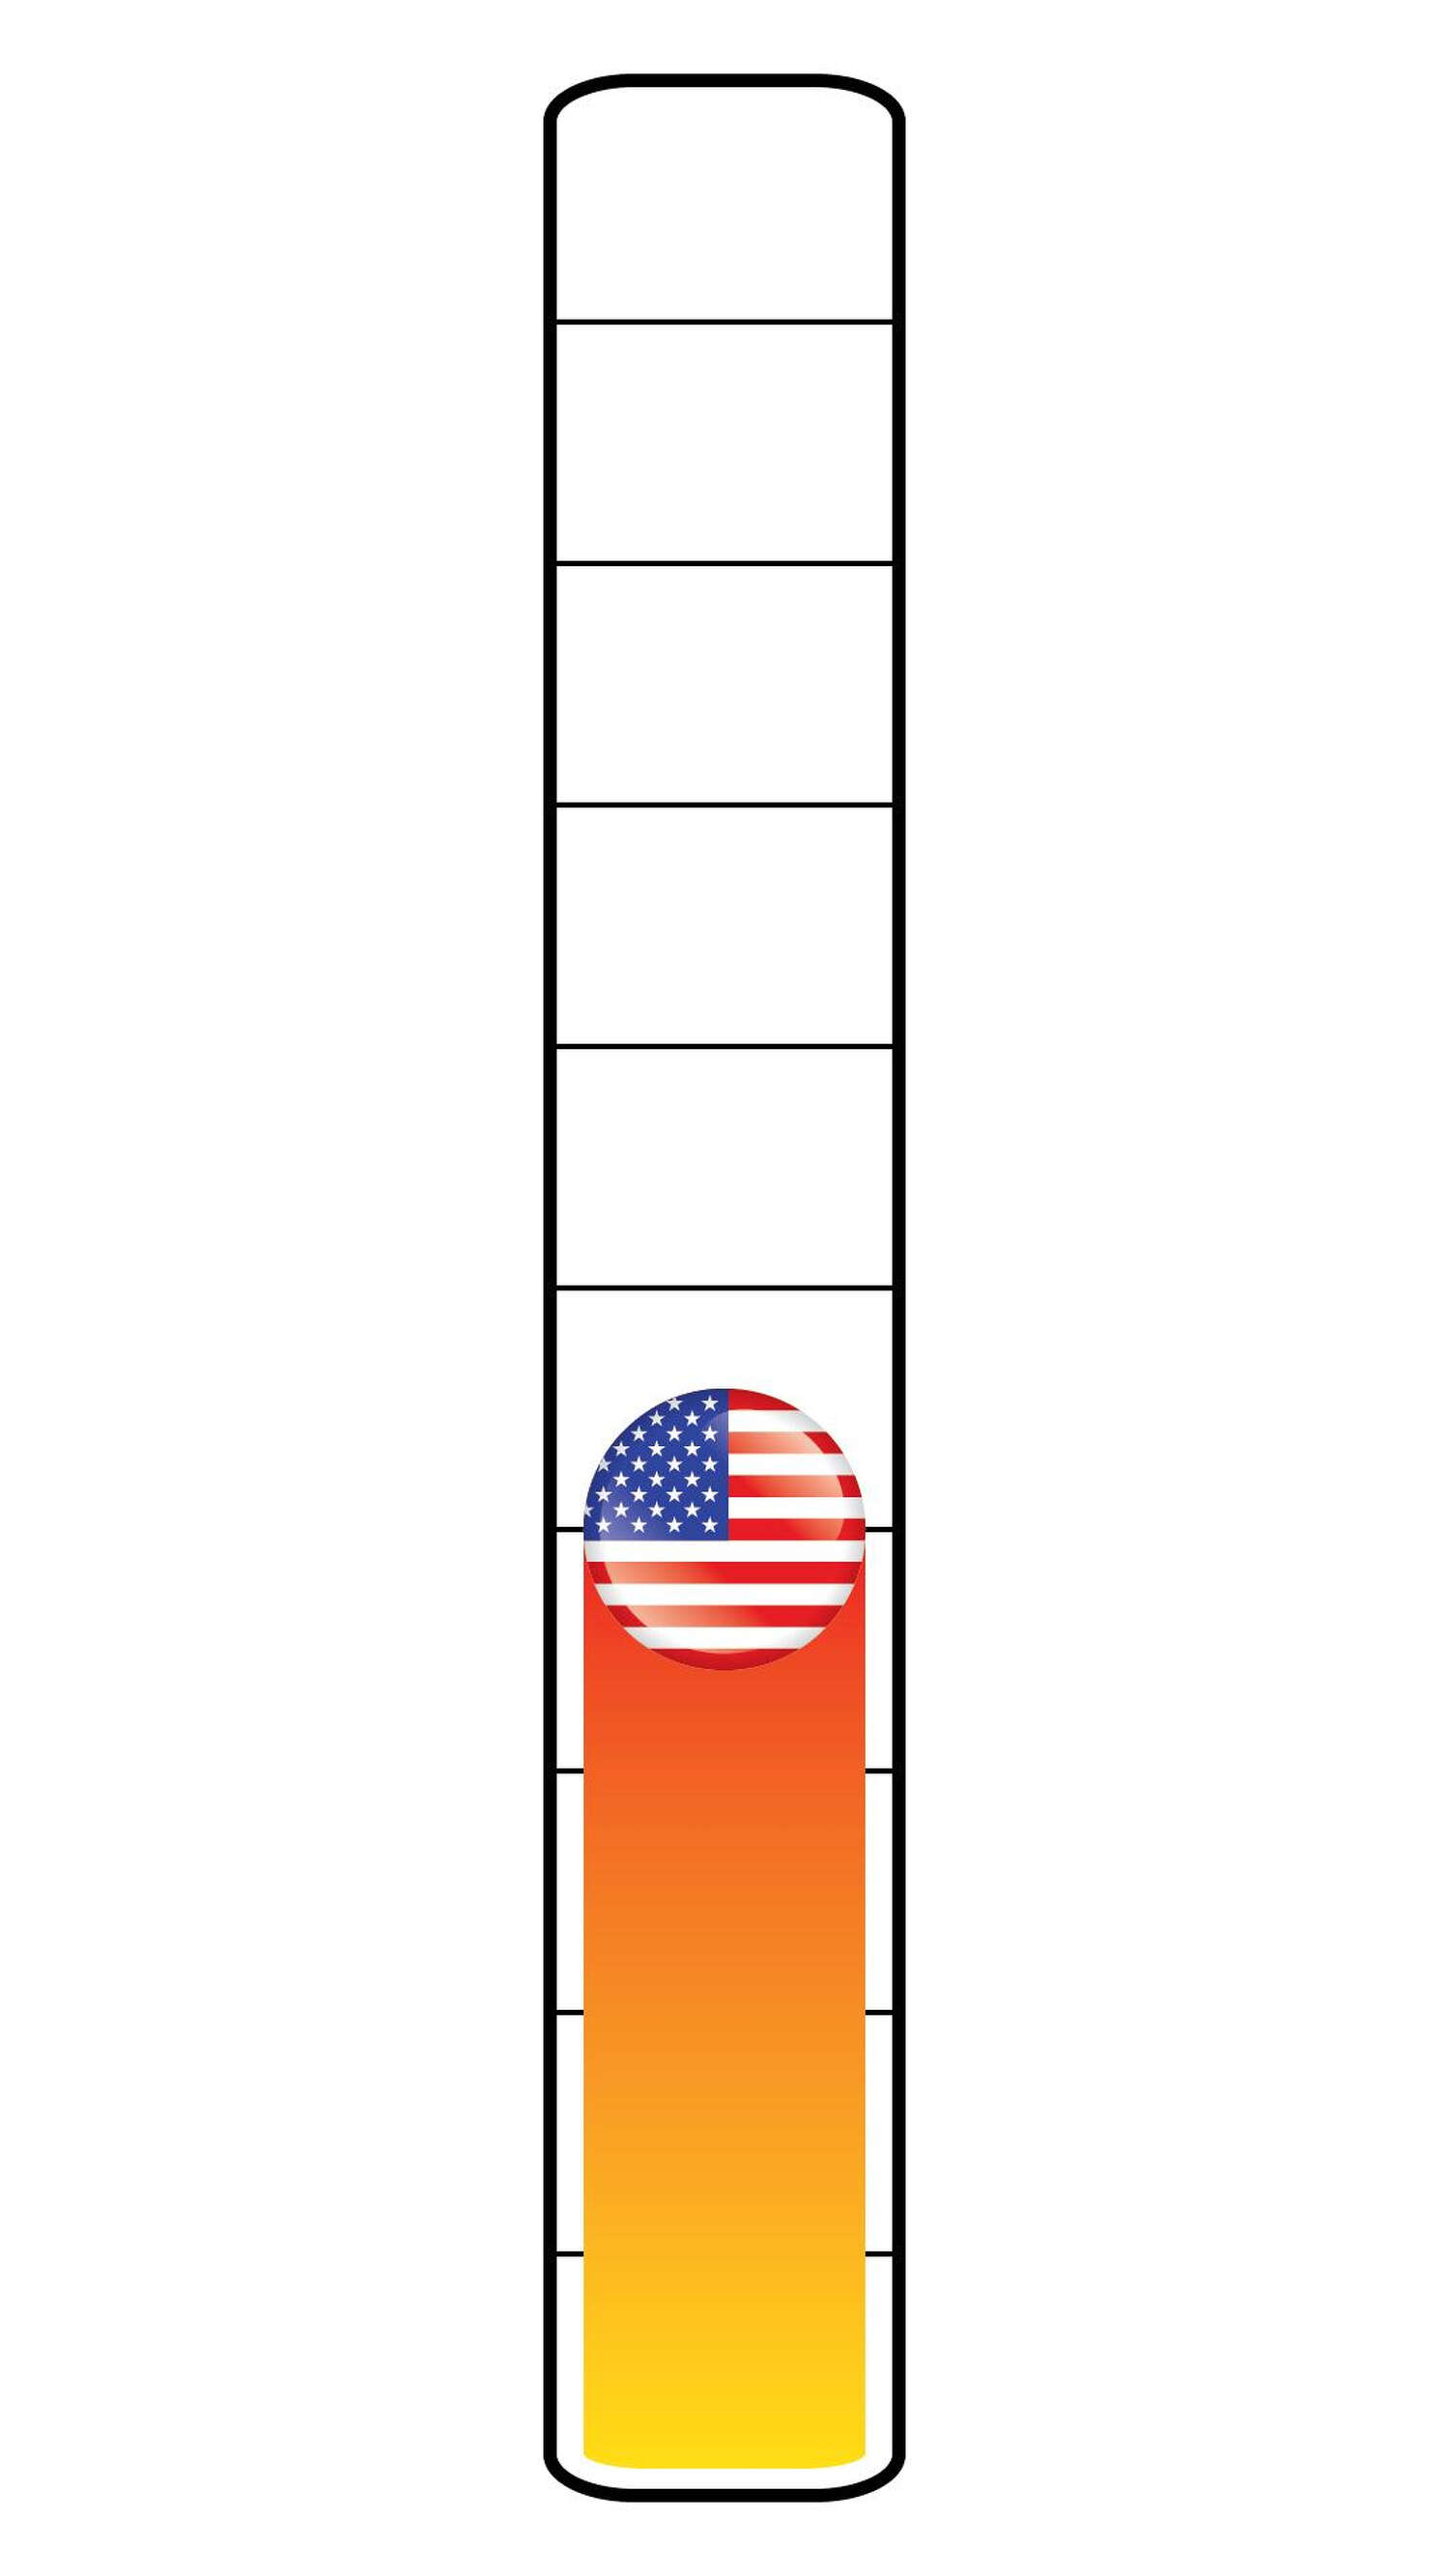 Meter: 4/10. Icon of the U.S. flag.